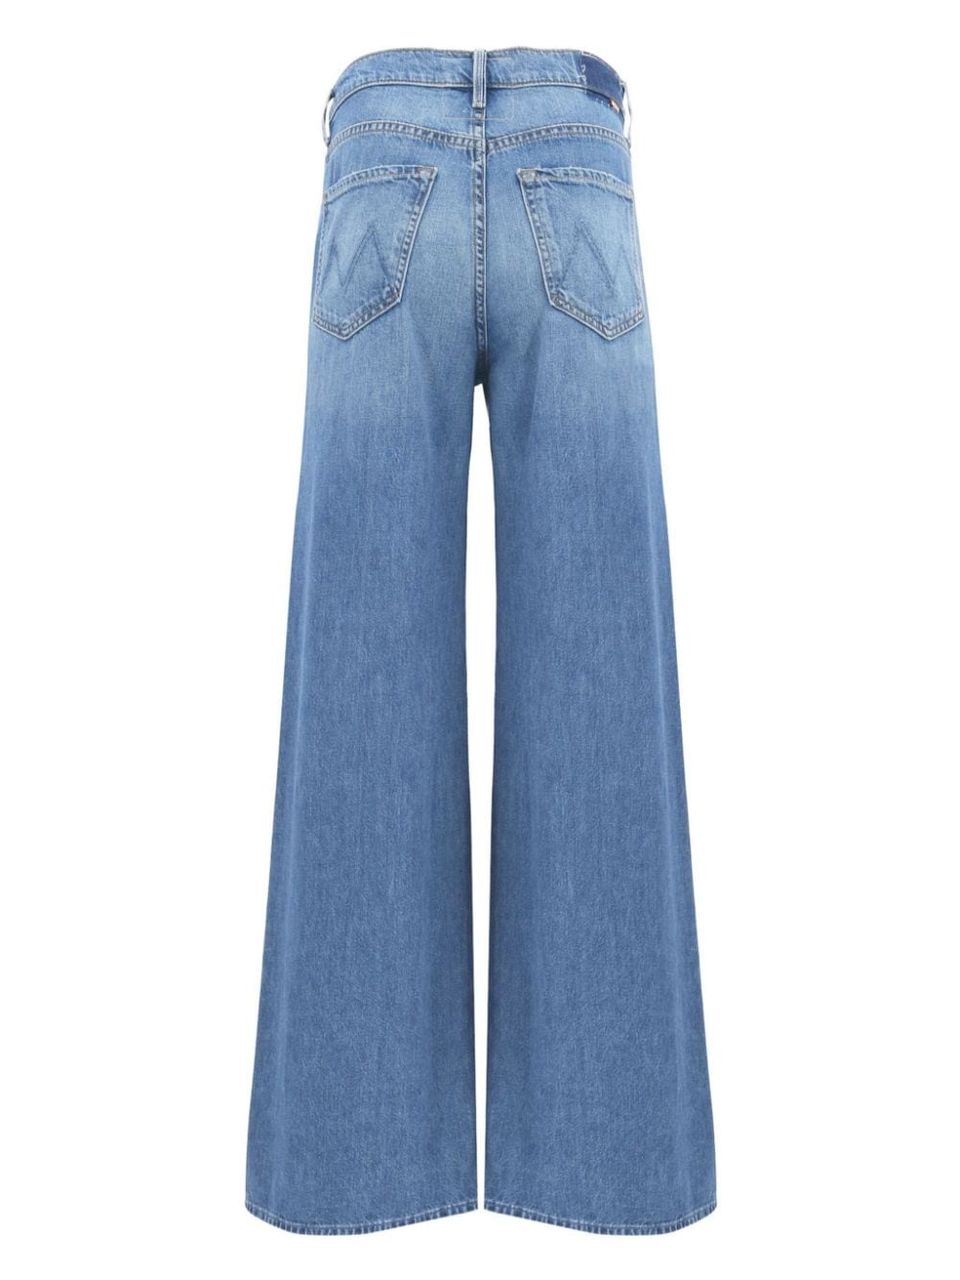 'The Ditcher Roller Sneak' jeans